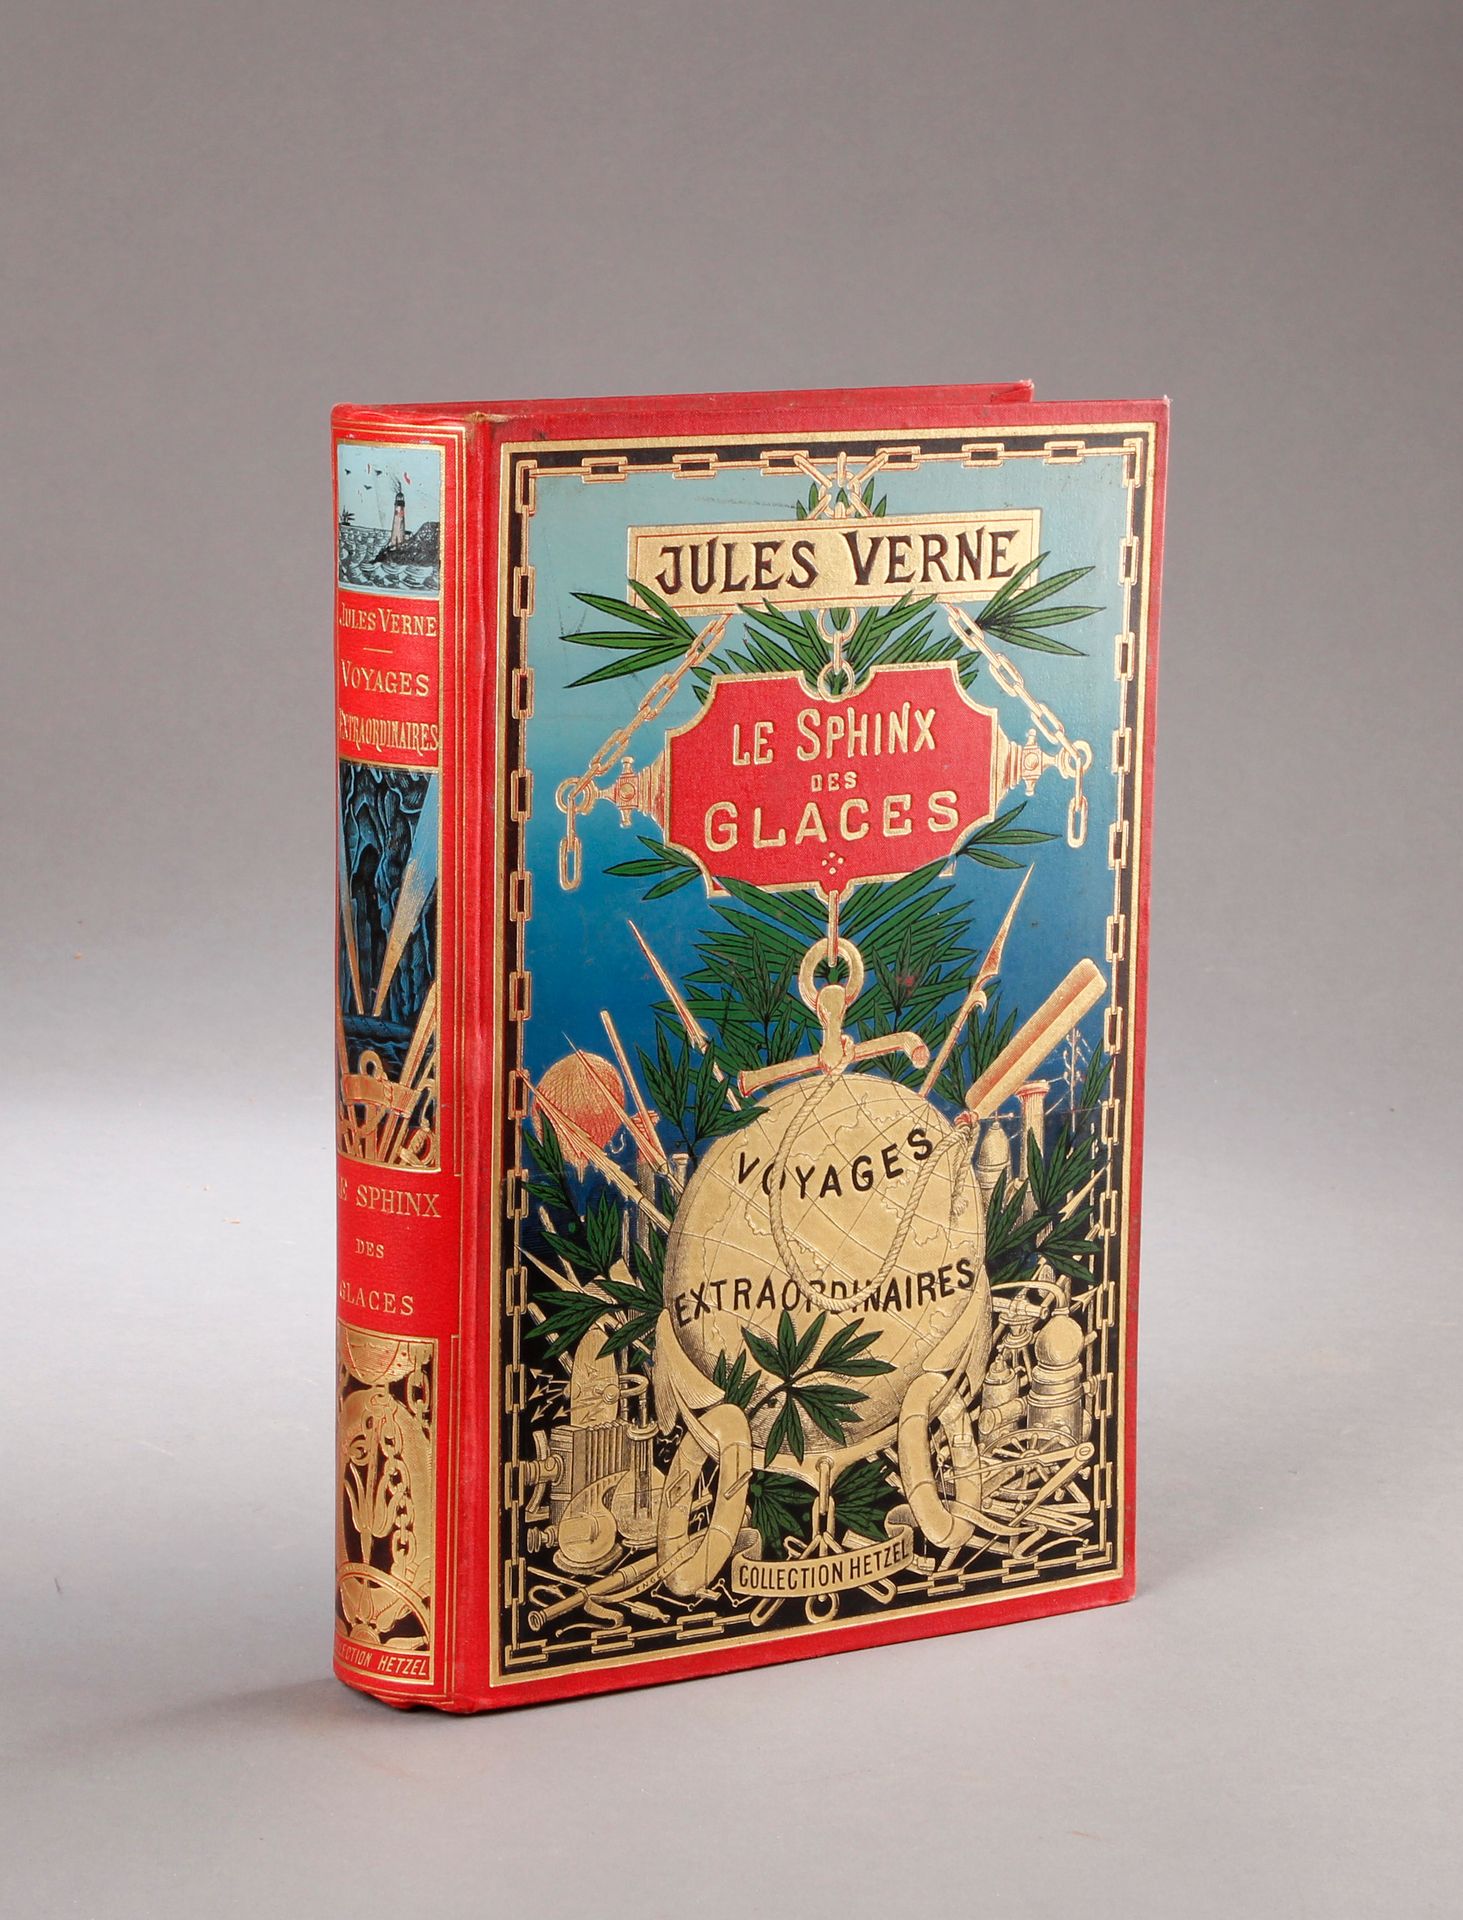 Jules VERNE / HETZEL. Le Sphinx de glaces (1897).
Polychrome boards with gilt gl&hellip;